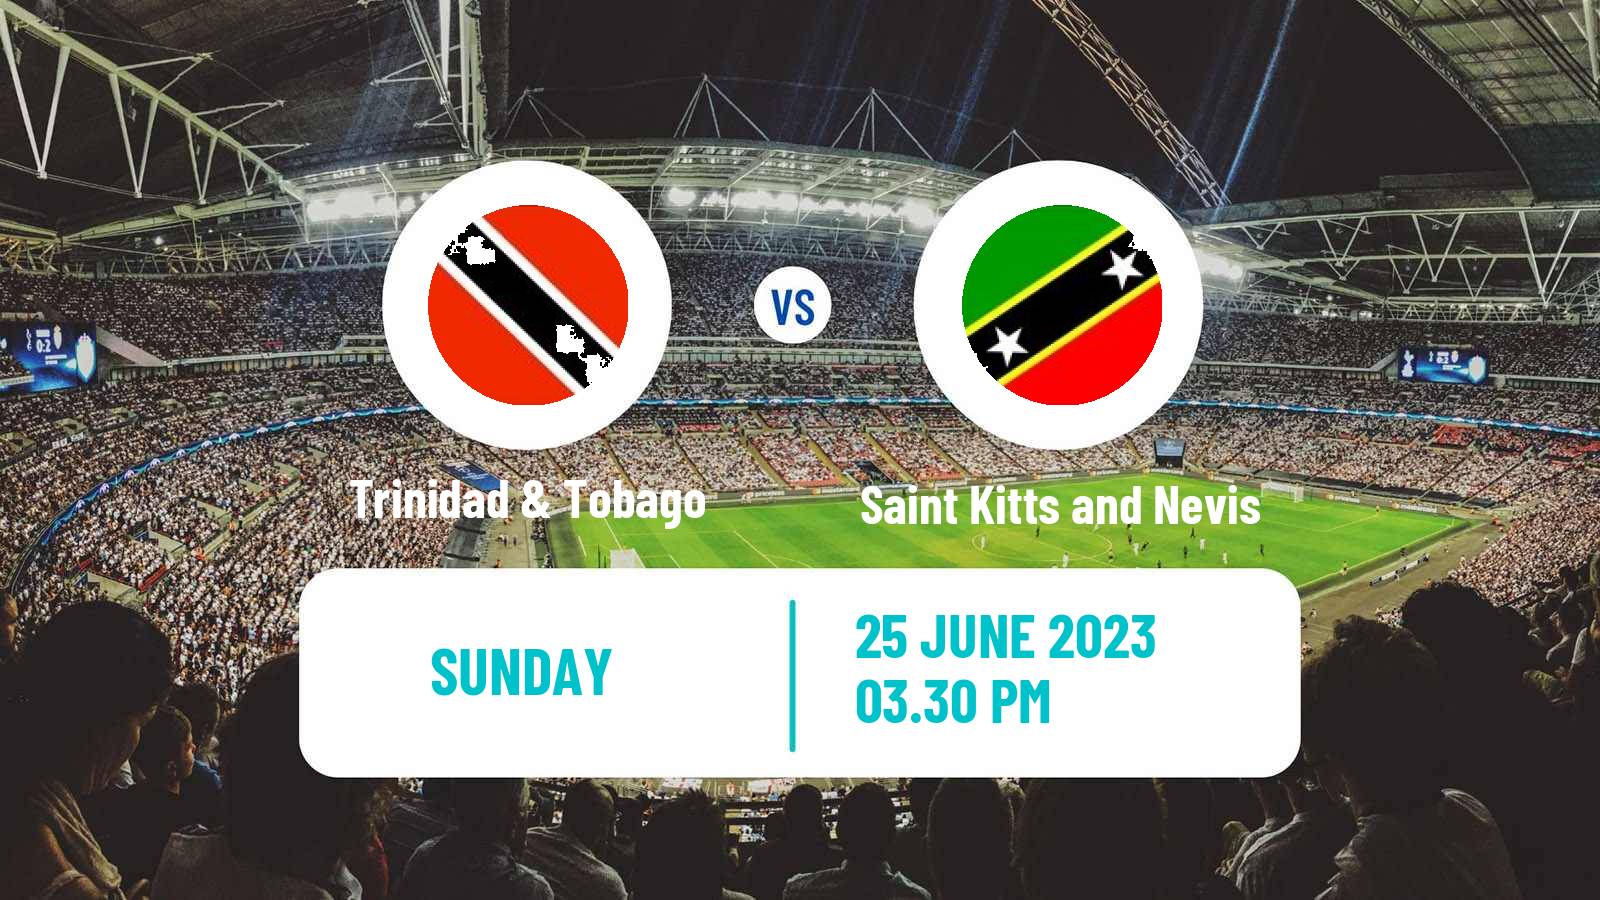 Soccer Gold Cup Trinidad & Tobago - Saint Kitts and Nevis